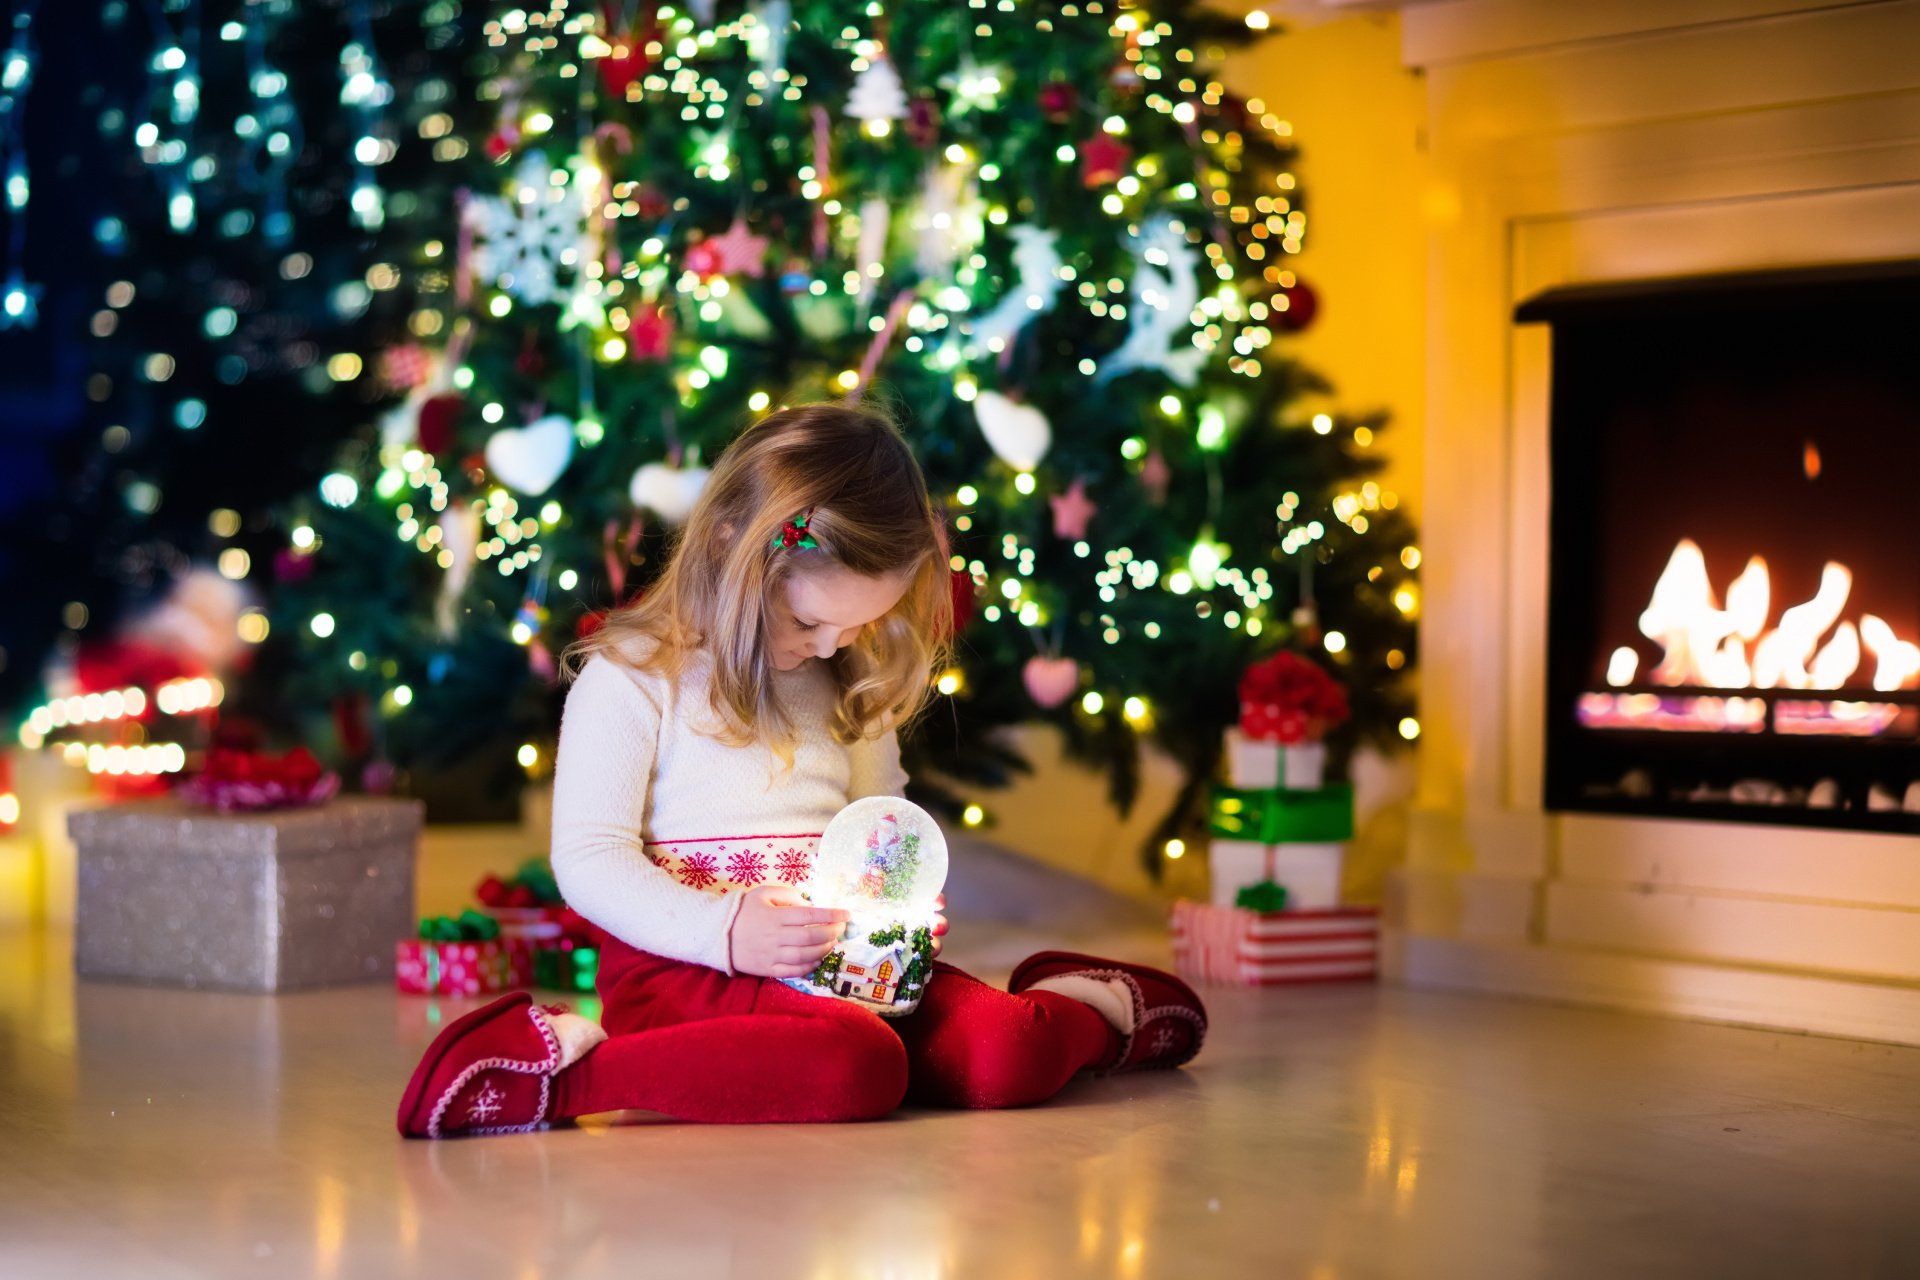 A little girl sits on the floor looking down at a snow globe with a Christmas tree in the background